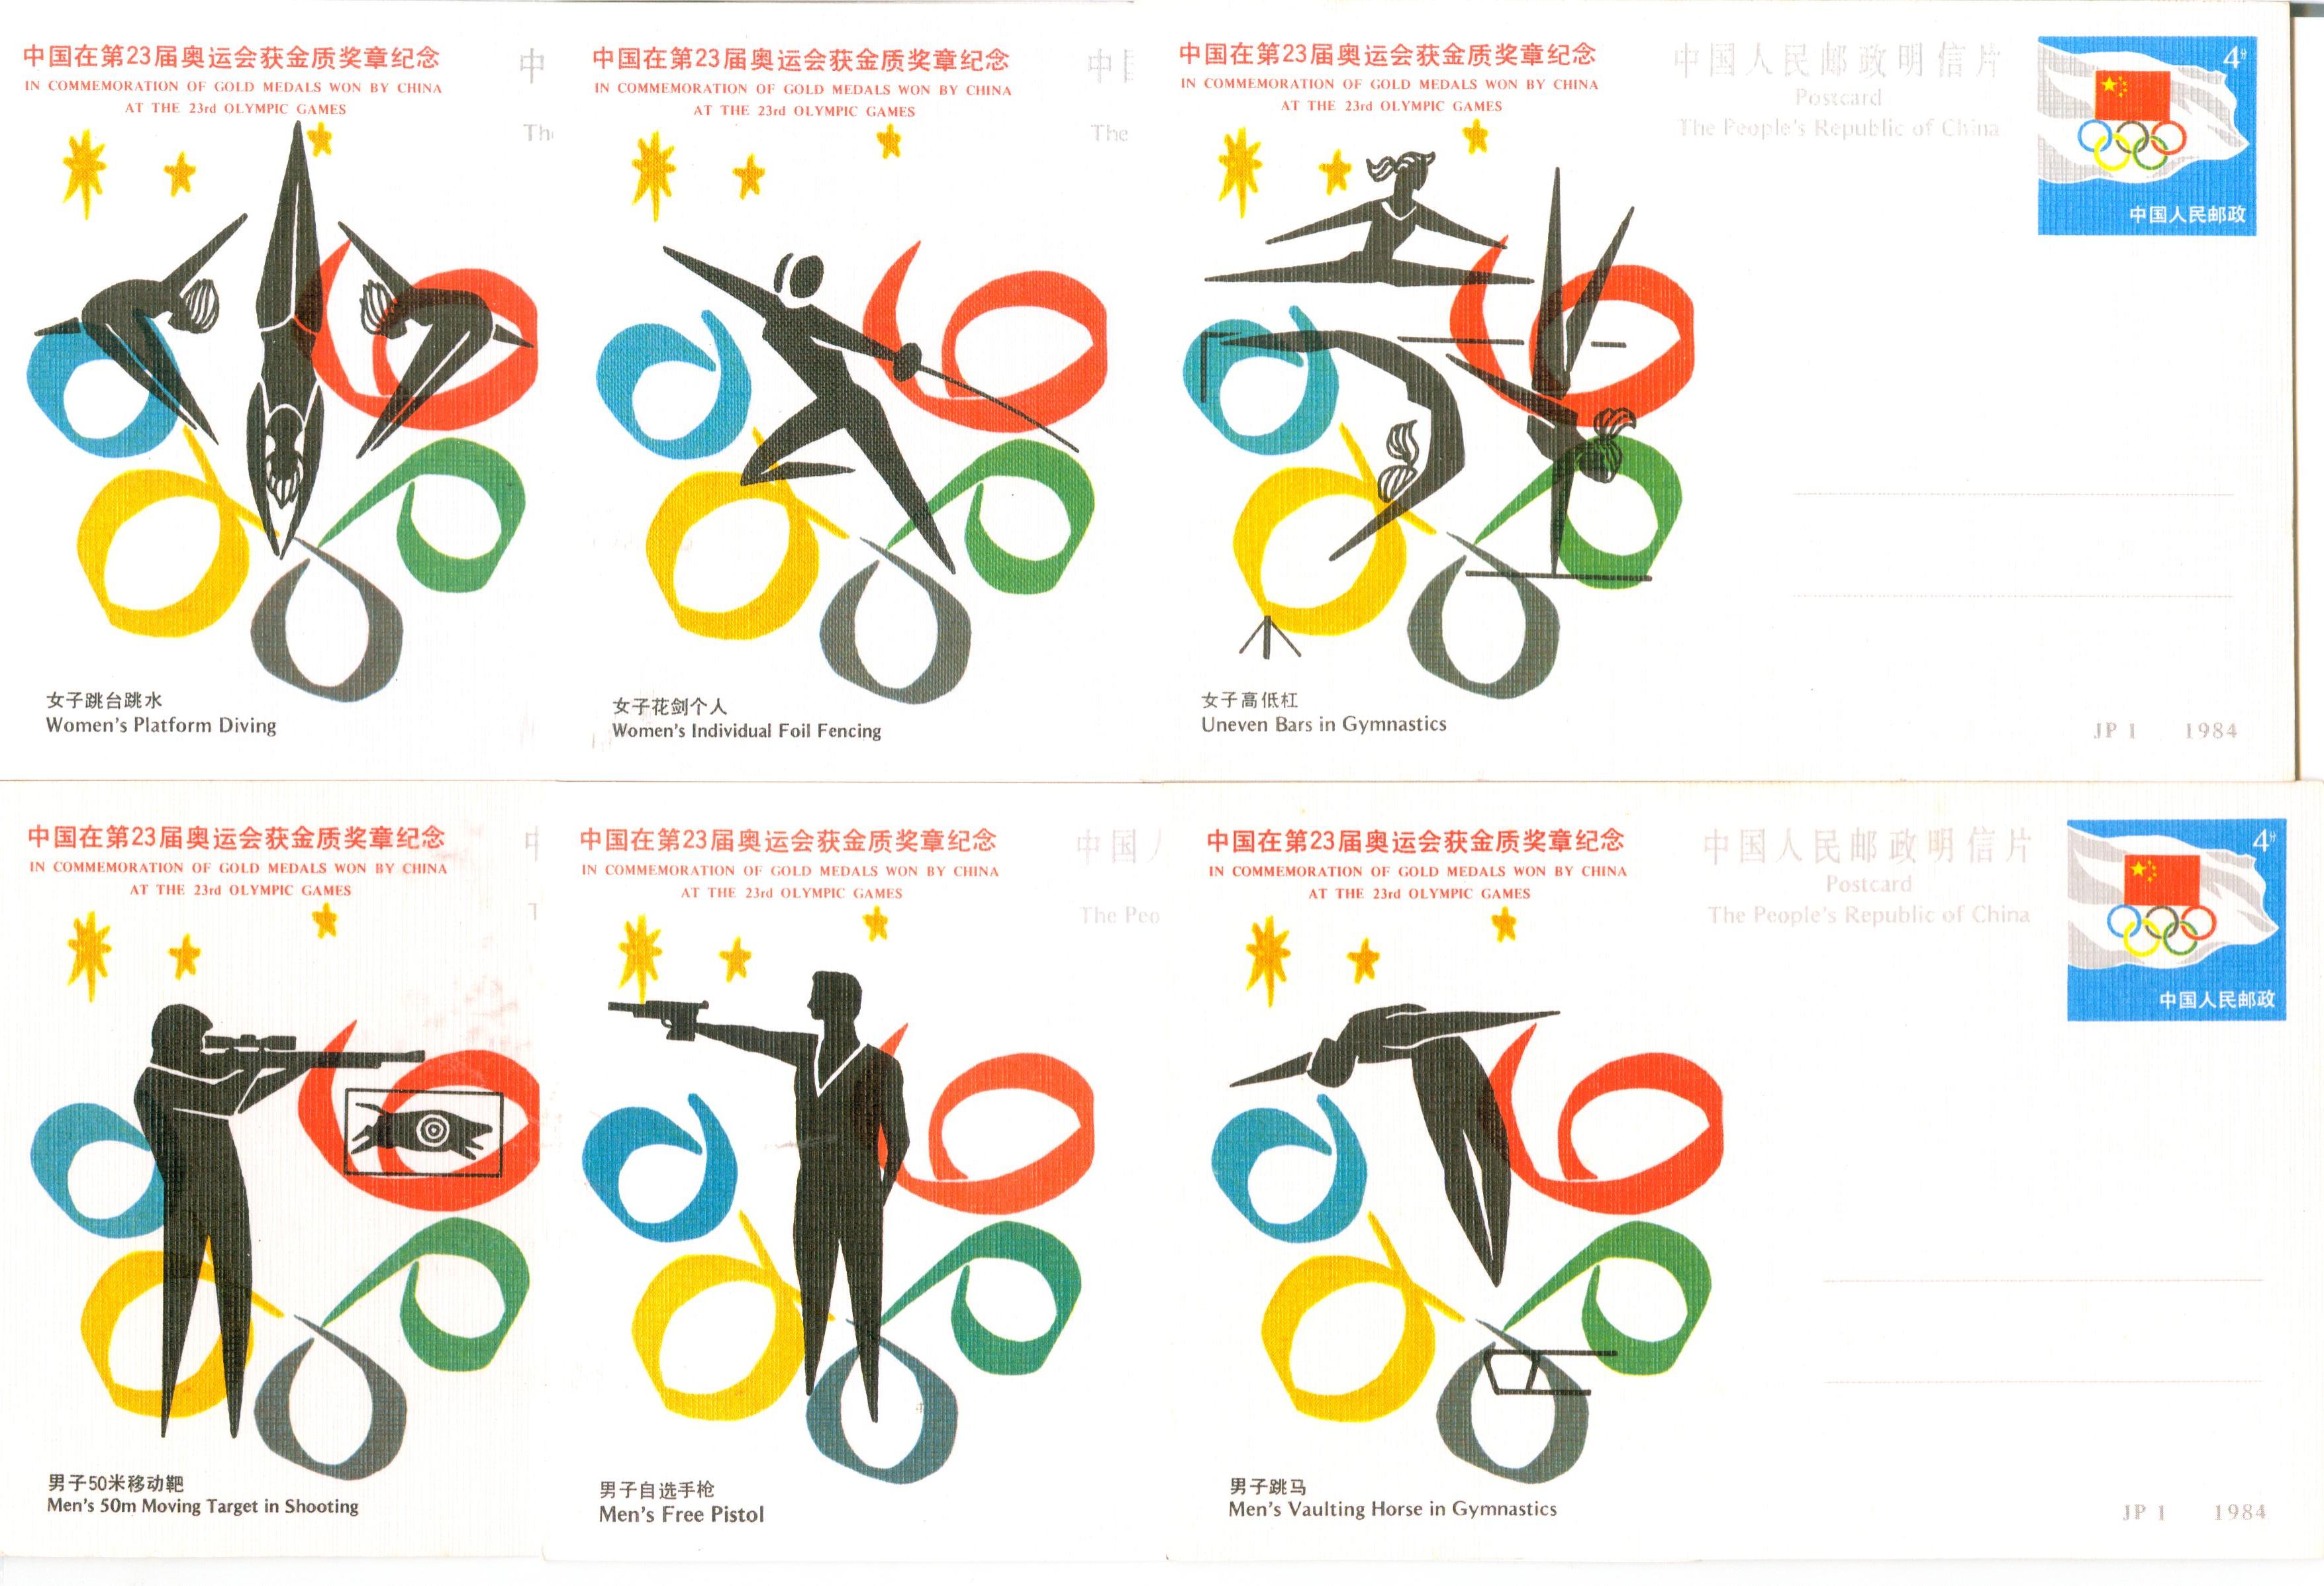 JP1, China at the 23th Olympic Games 1984 (P.R.China First Postal Cards)